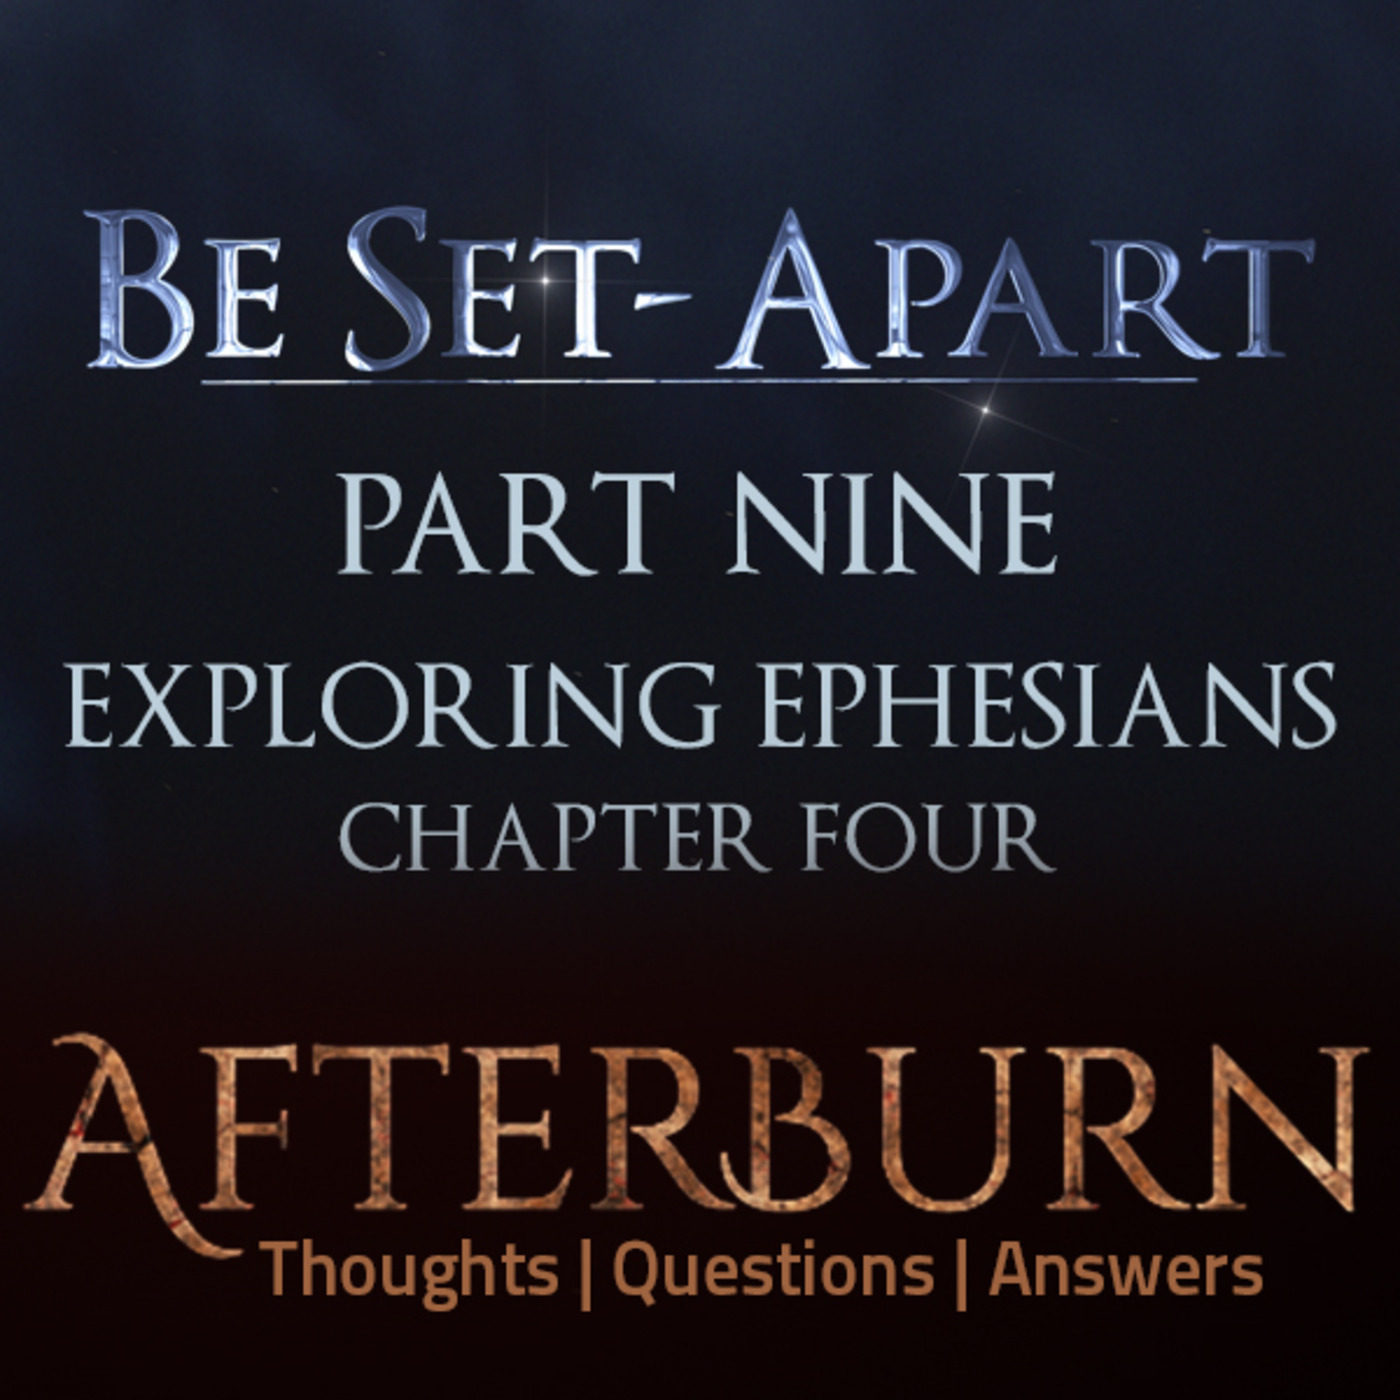 Episode 775: Afterburn | Thoughts, Q&A on Be Set-Apart | Part Nine | Exploring Ephesians Chapter Four